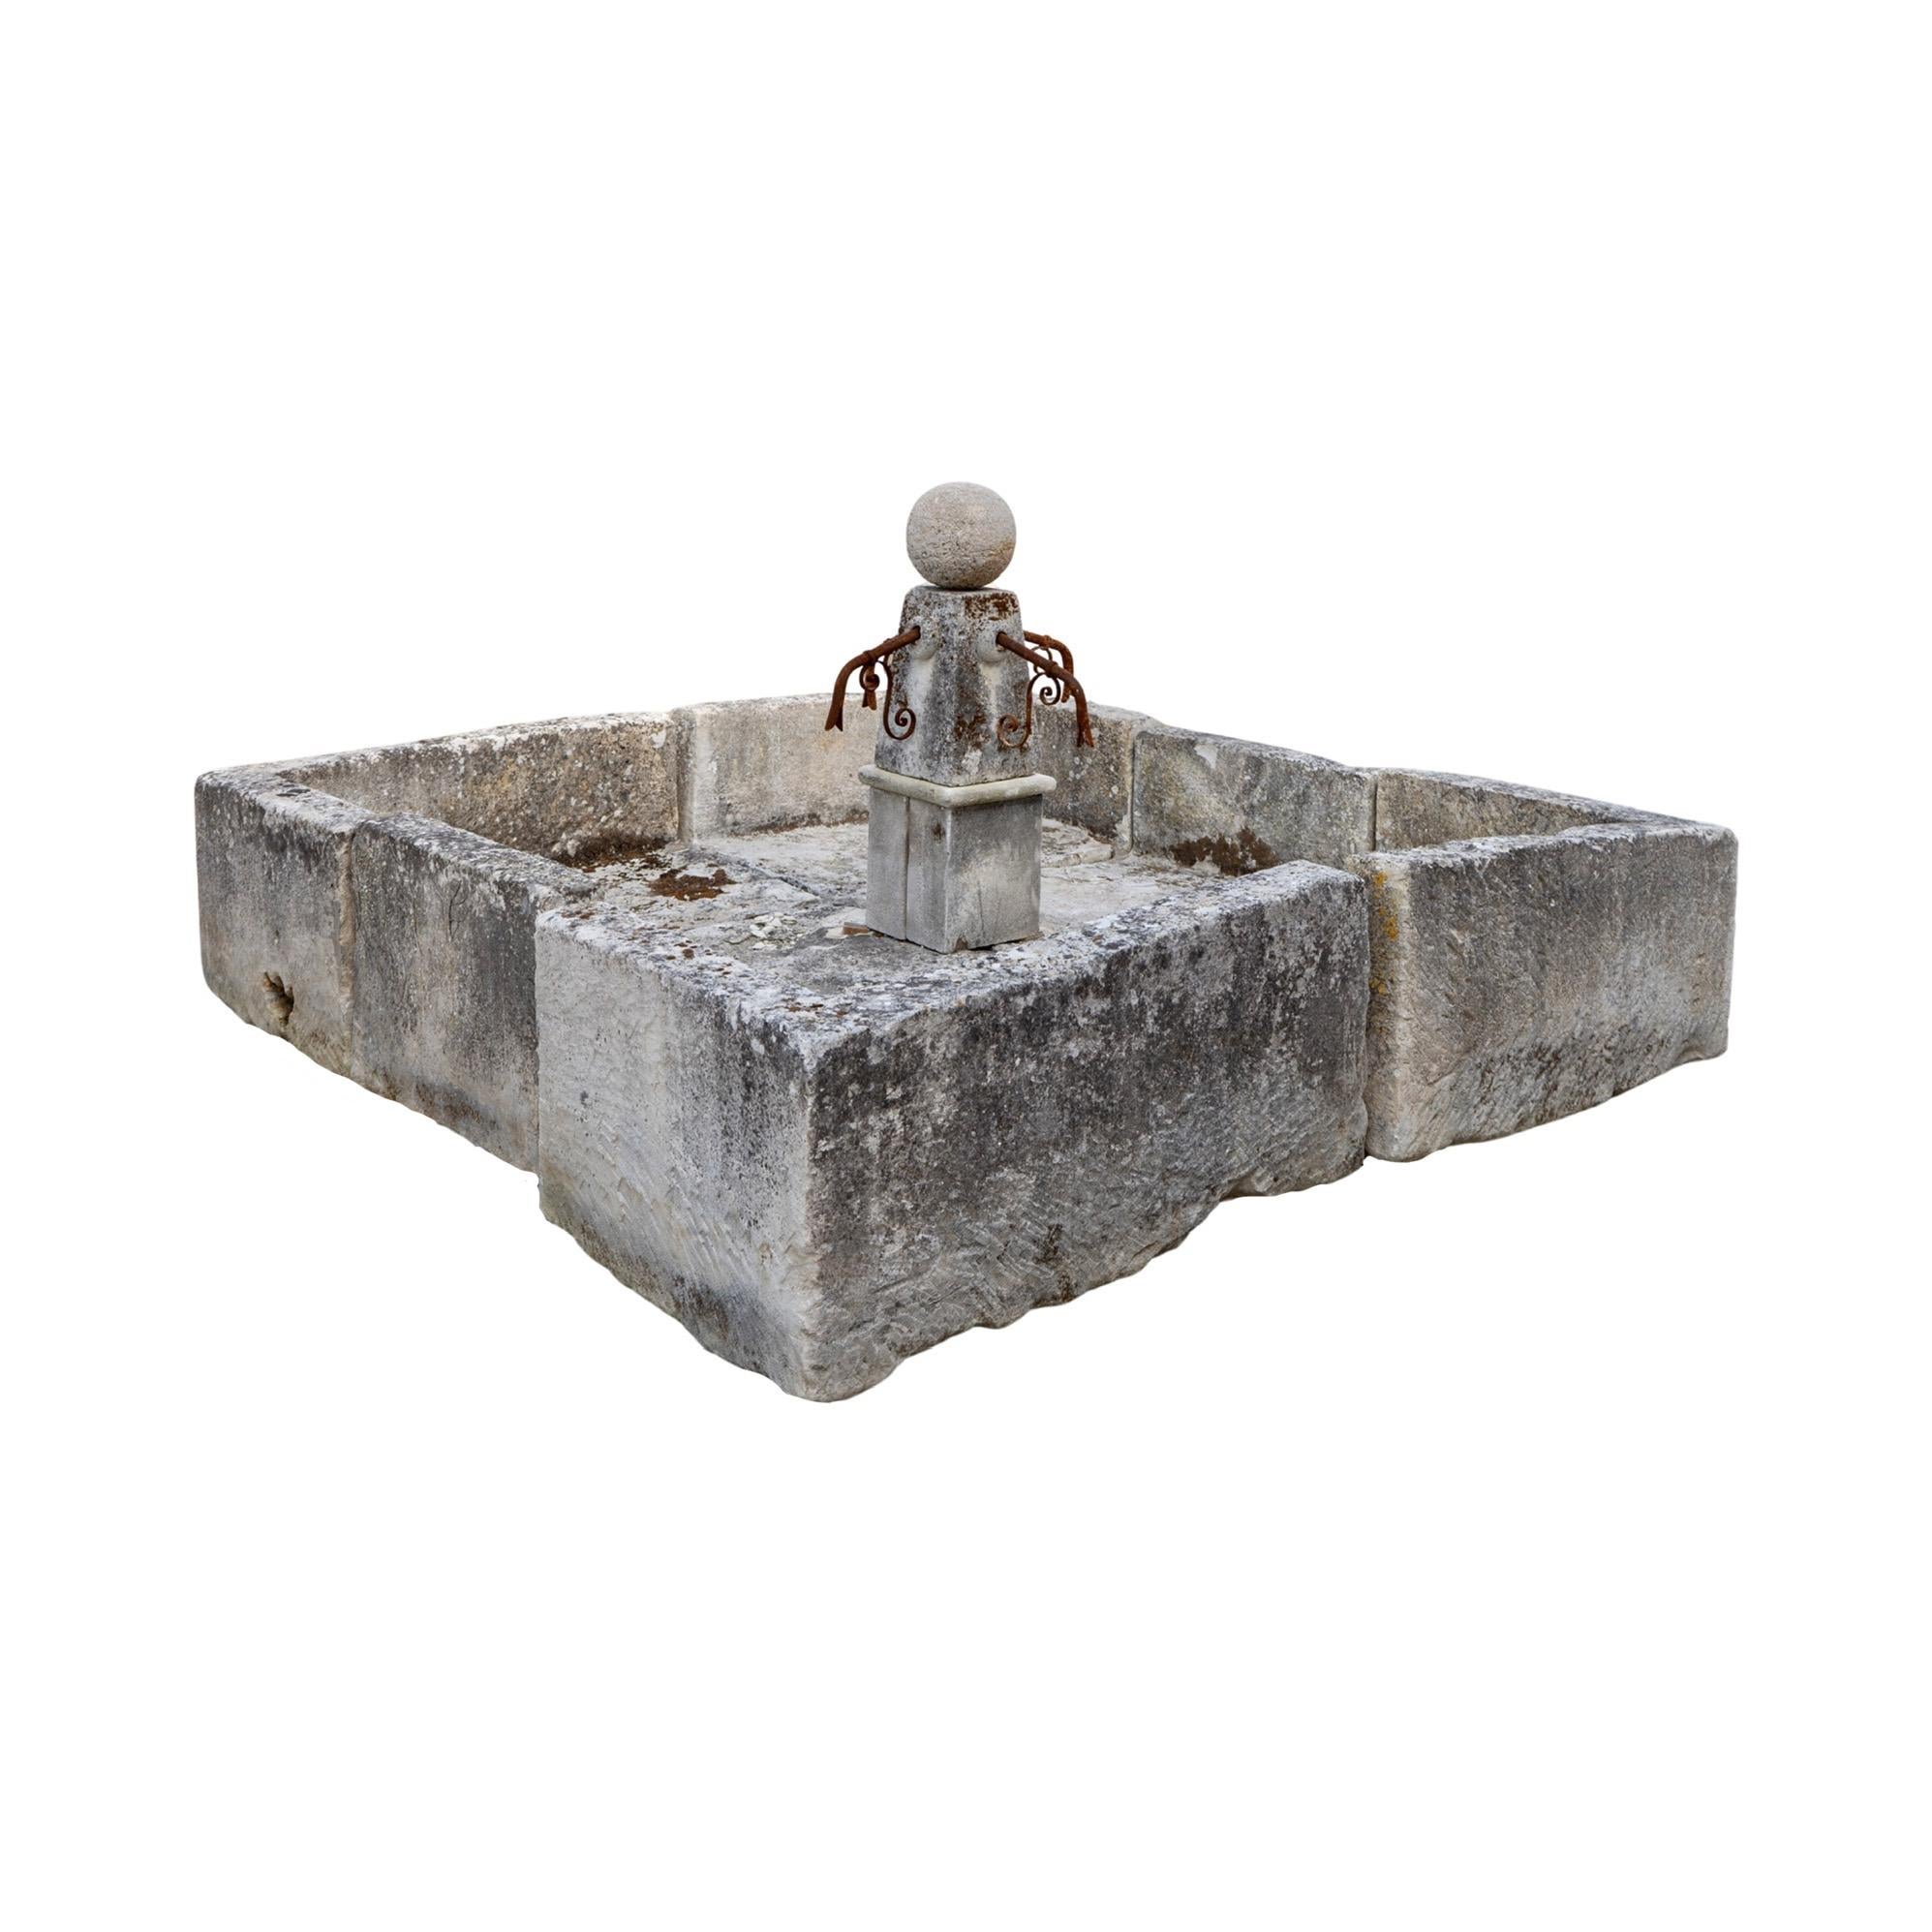 This antique French limestone central fountain from the 17th century is the perfect addition to any outdoor space. With a square shape and a central style design, it features a pillar with 4 spouts and overflow drainage openings for a classic look.